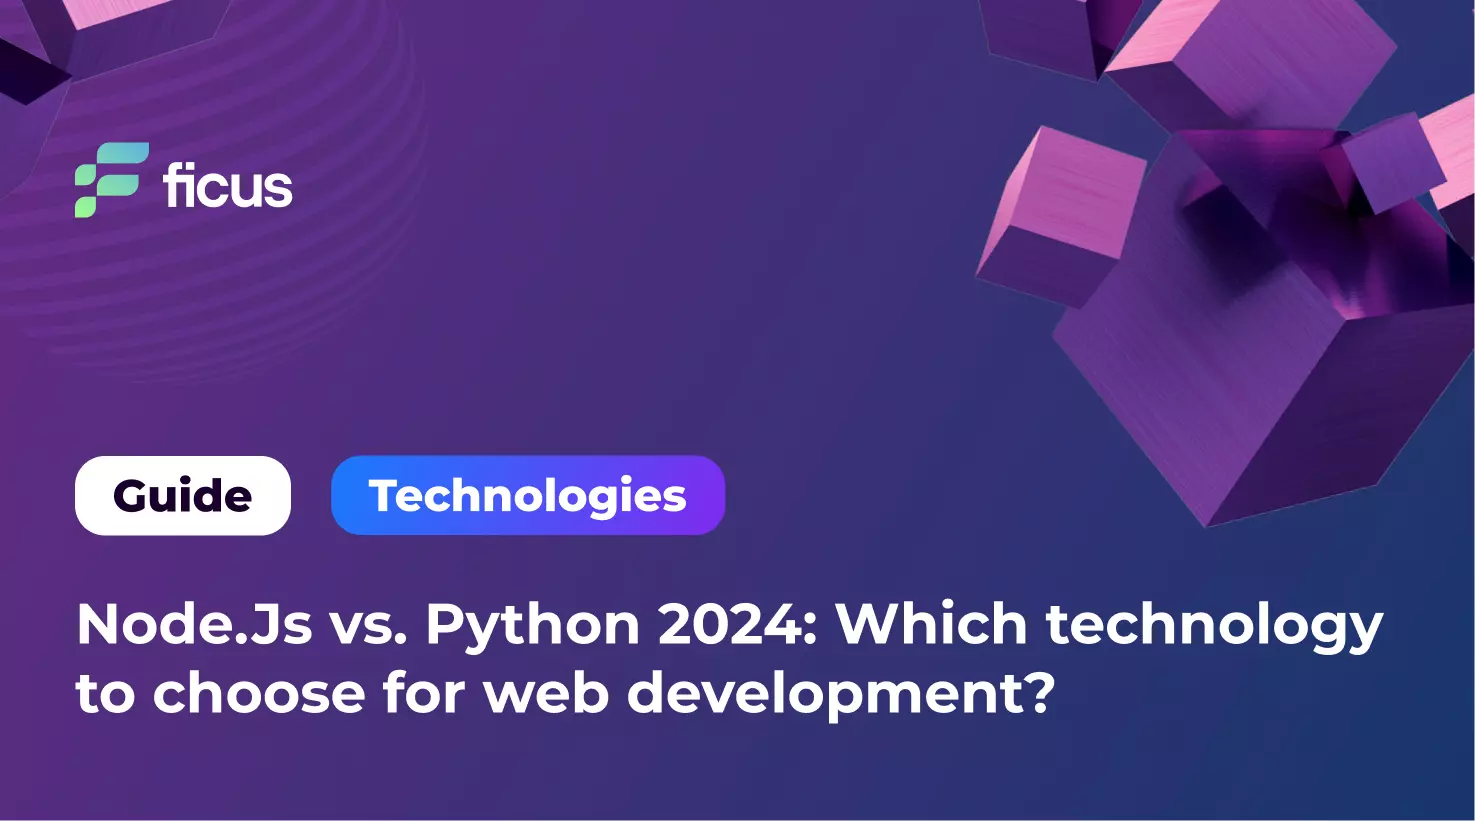 Node.Js vs. Python 2024_ Which technology to choose for web development_